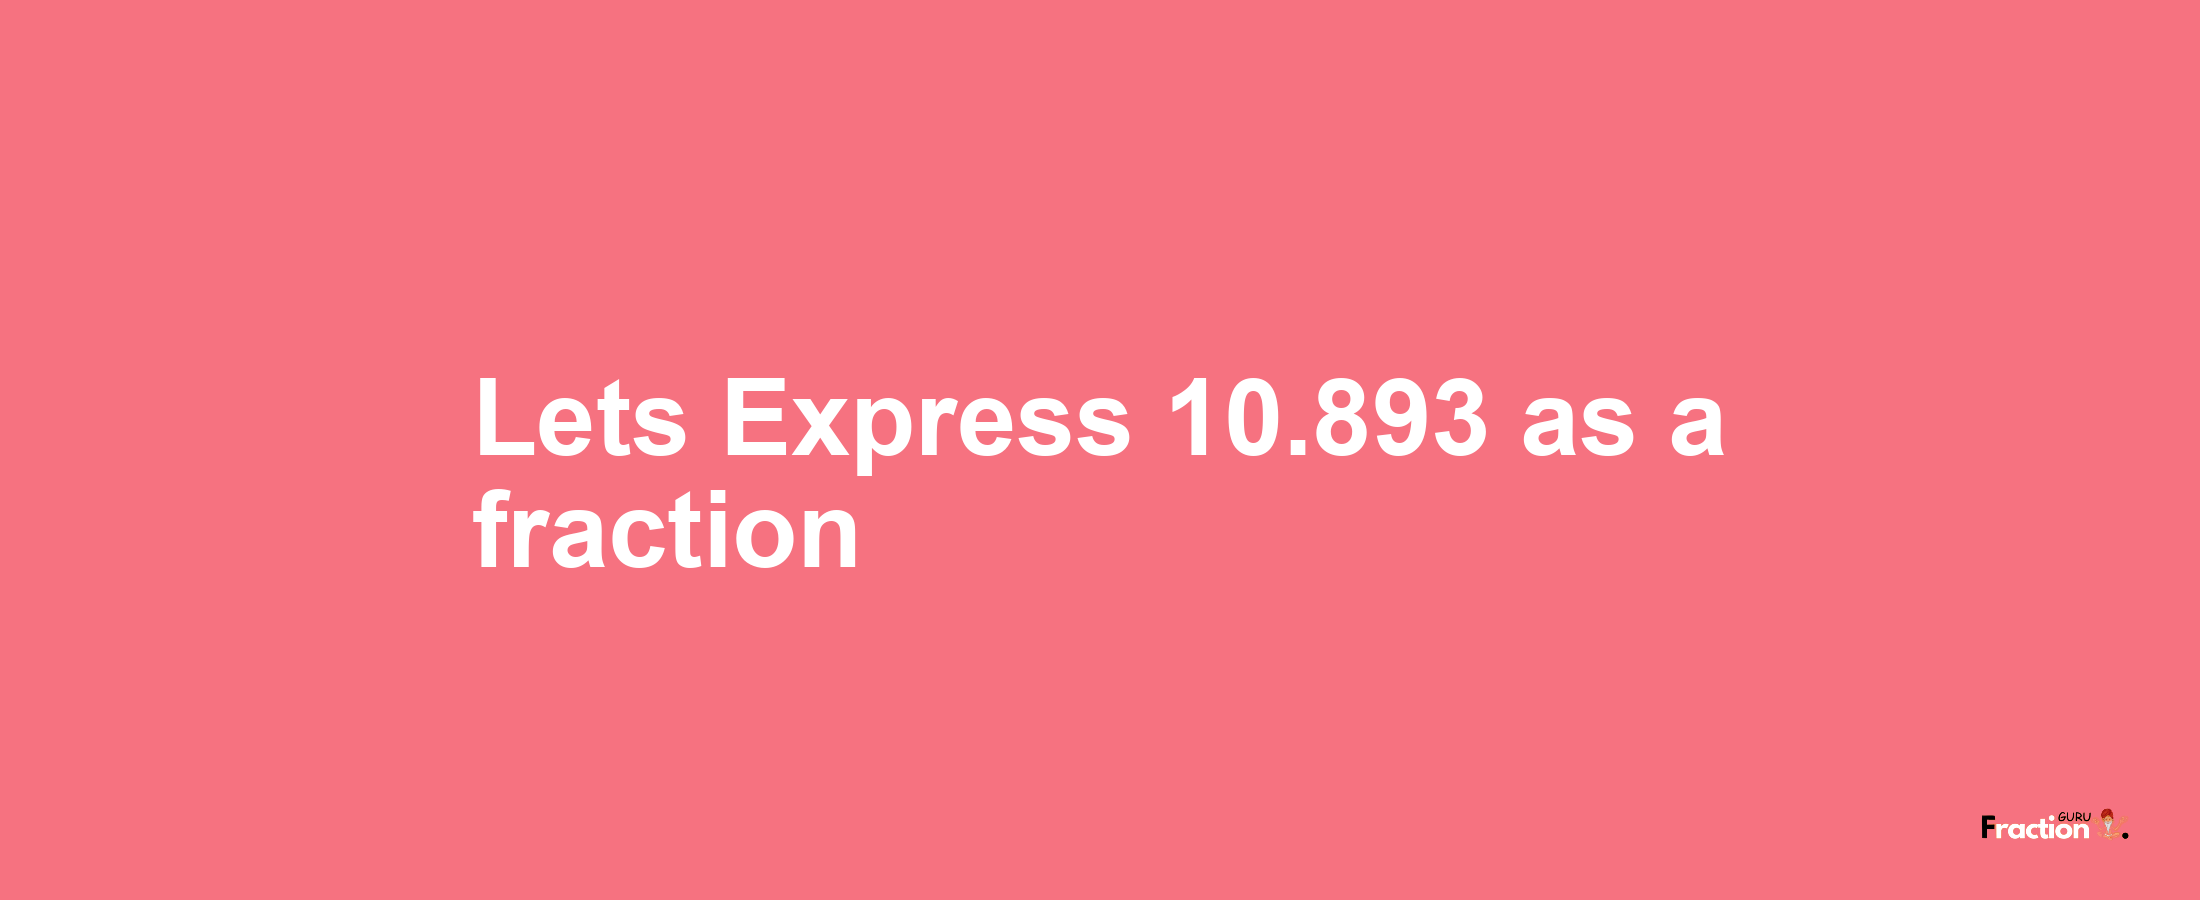 Lets Express 10.893 as afraction